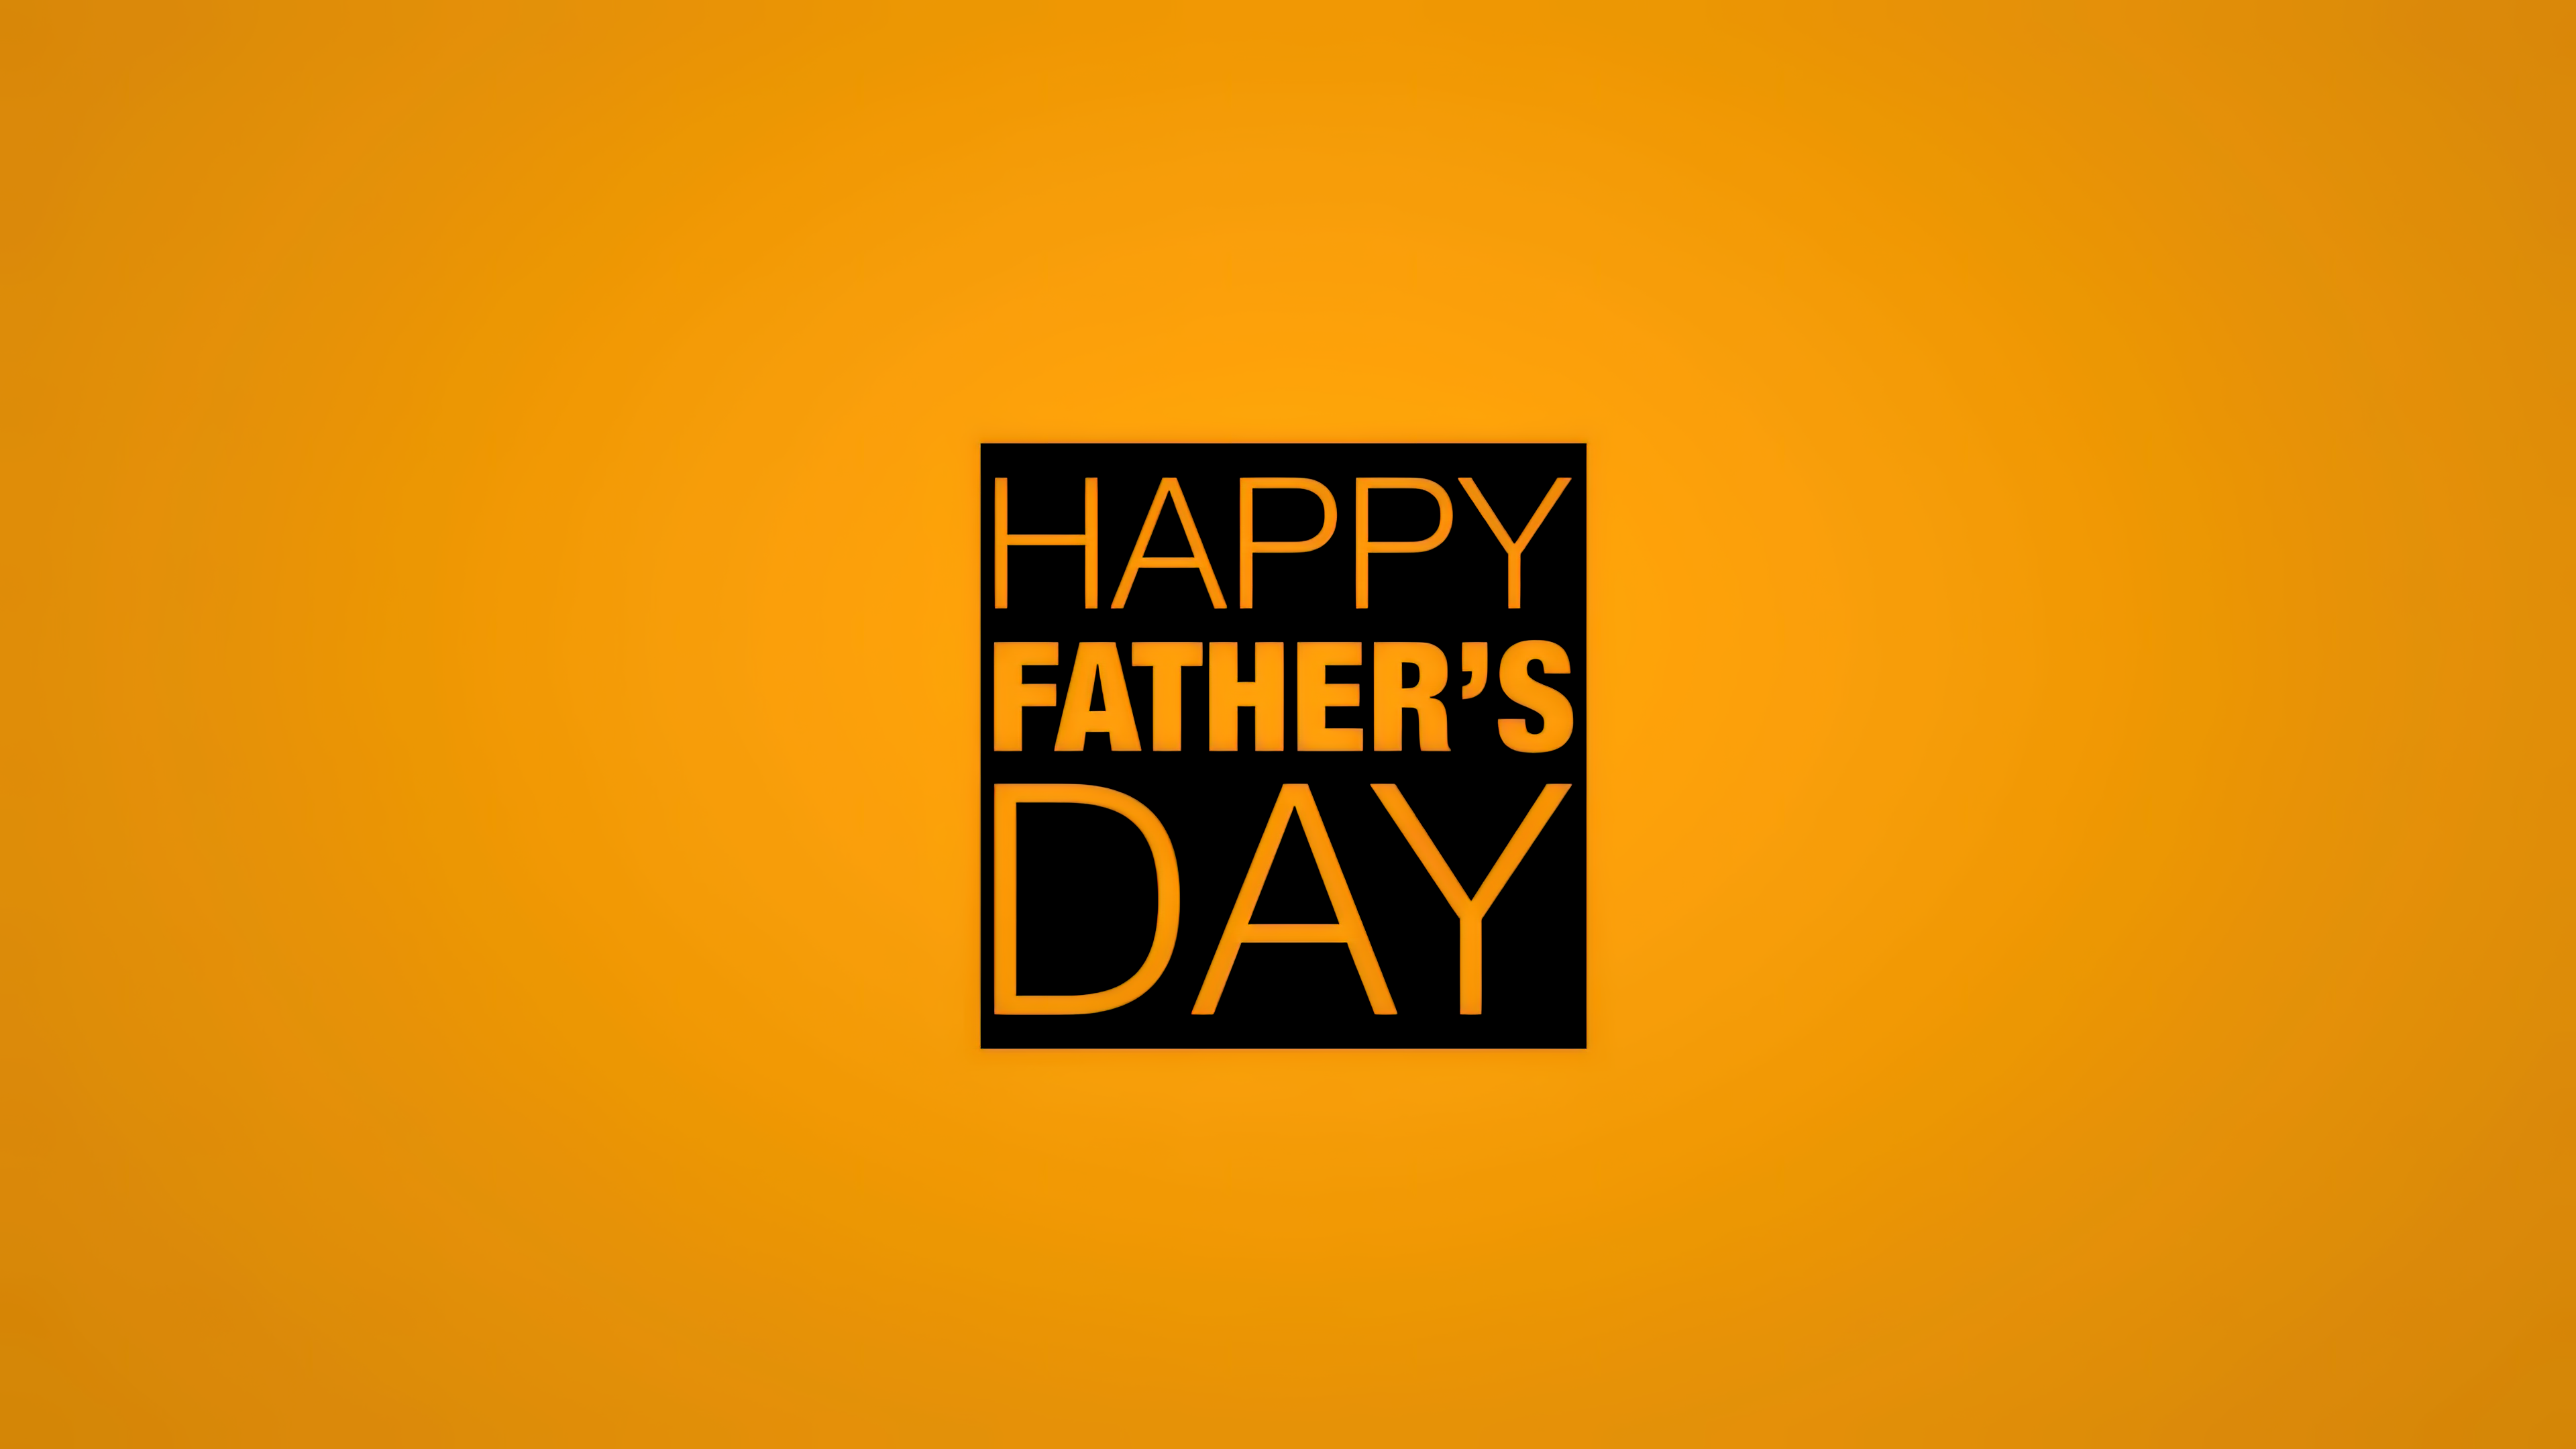 Fathers Day Wallpapers and Backgrounds